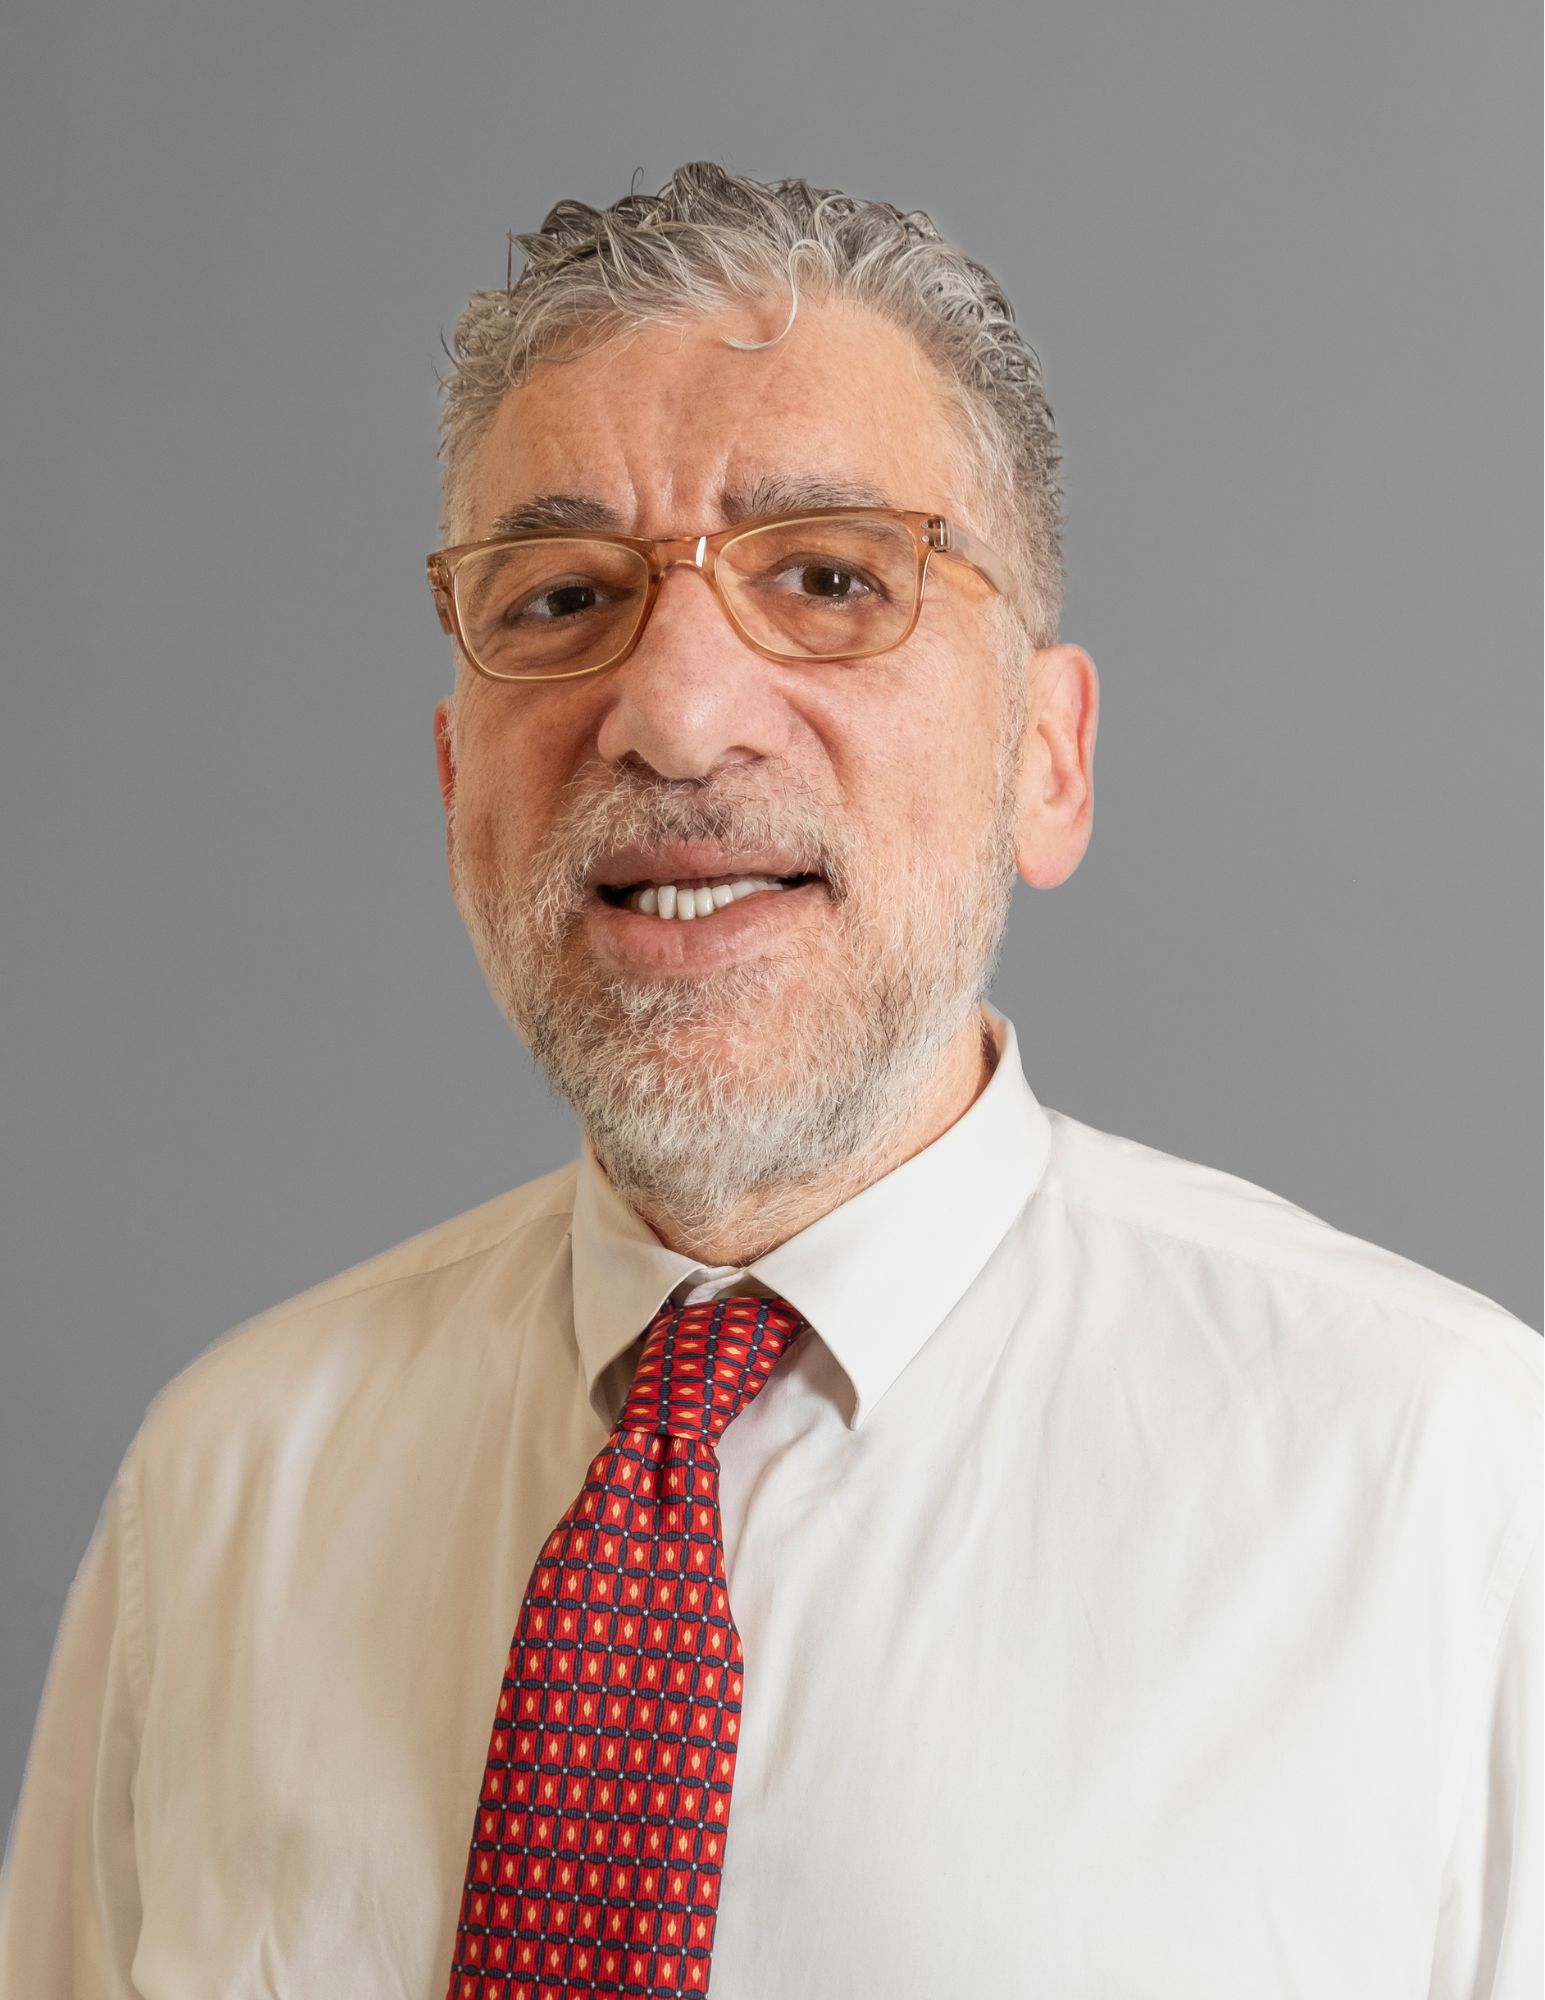 This image shows a man with short, gray curly hair and a beard. He is wearing glasses, a white dress shirt, and a red patterned tie. He is smiling slightly and is posing against a plain gray background.